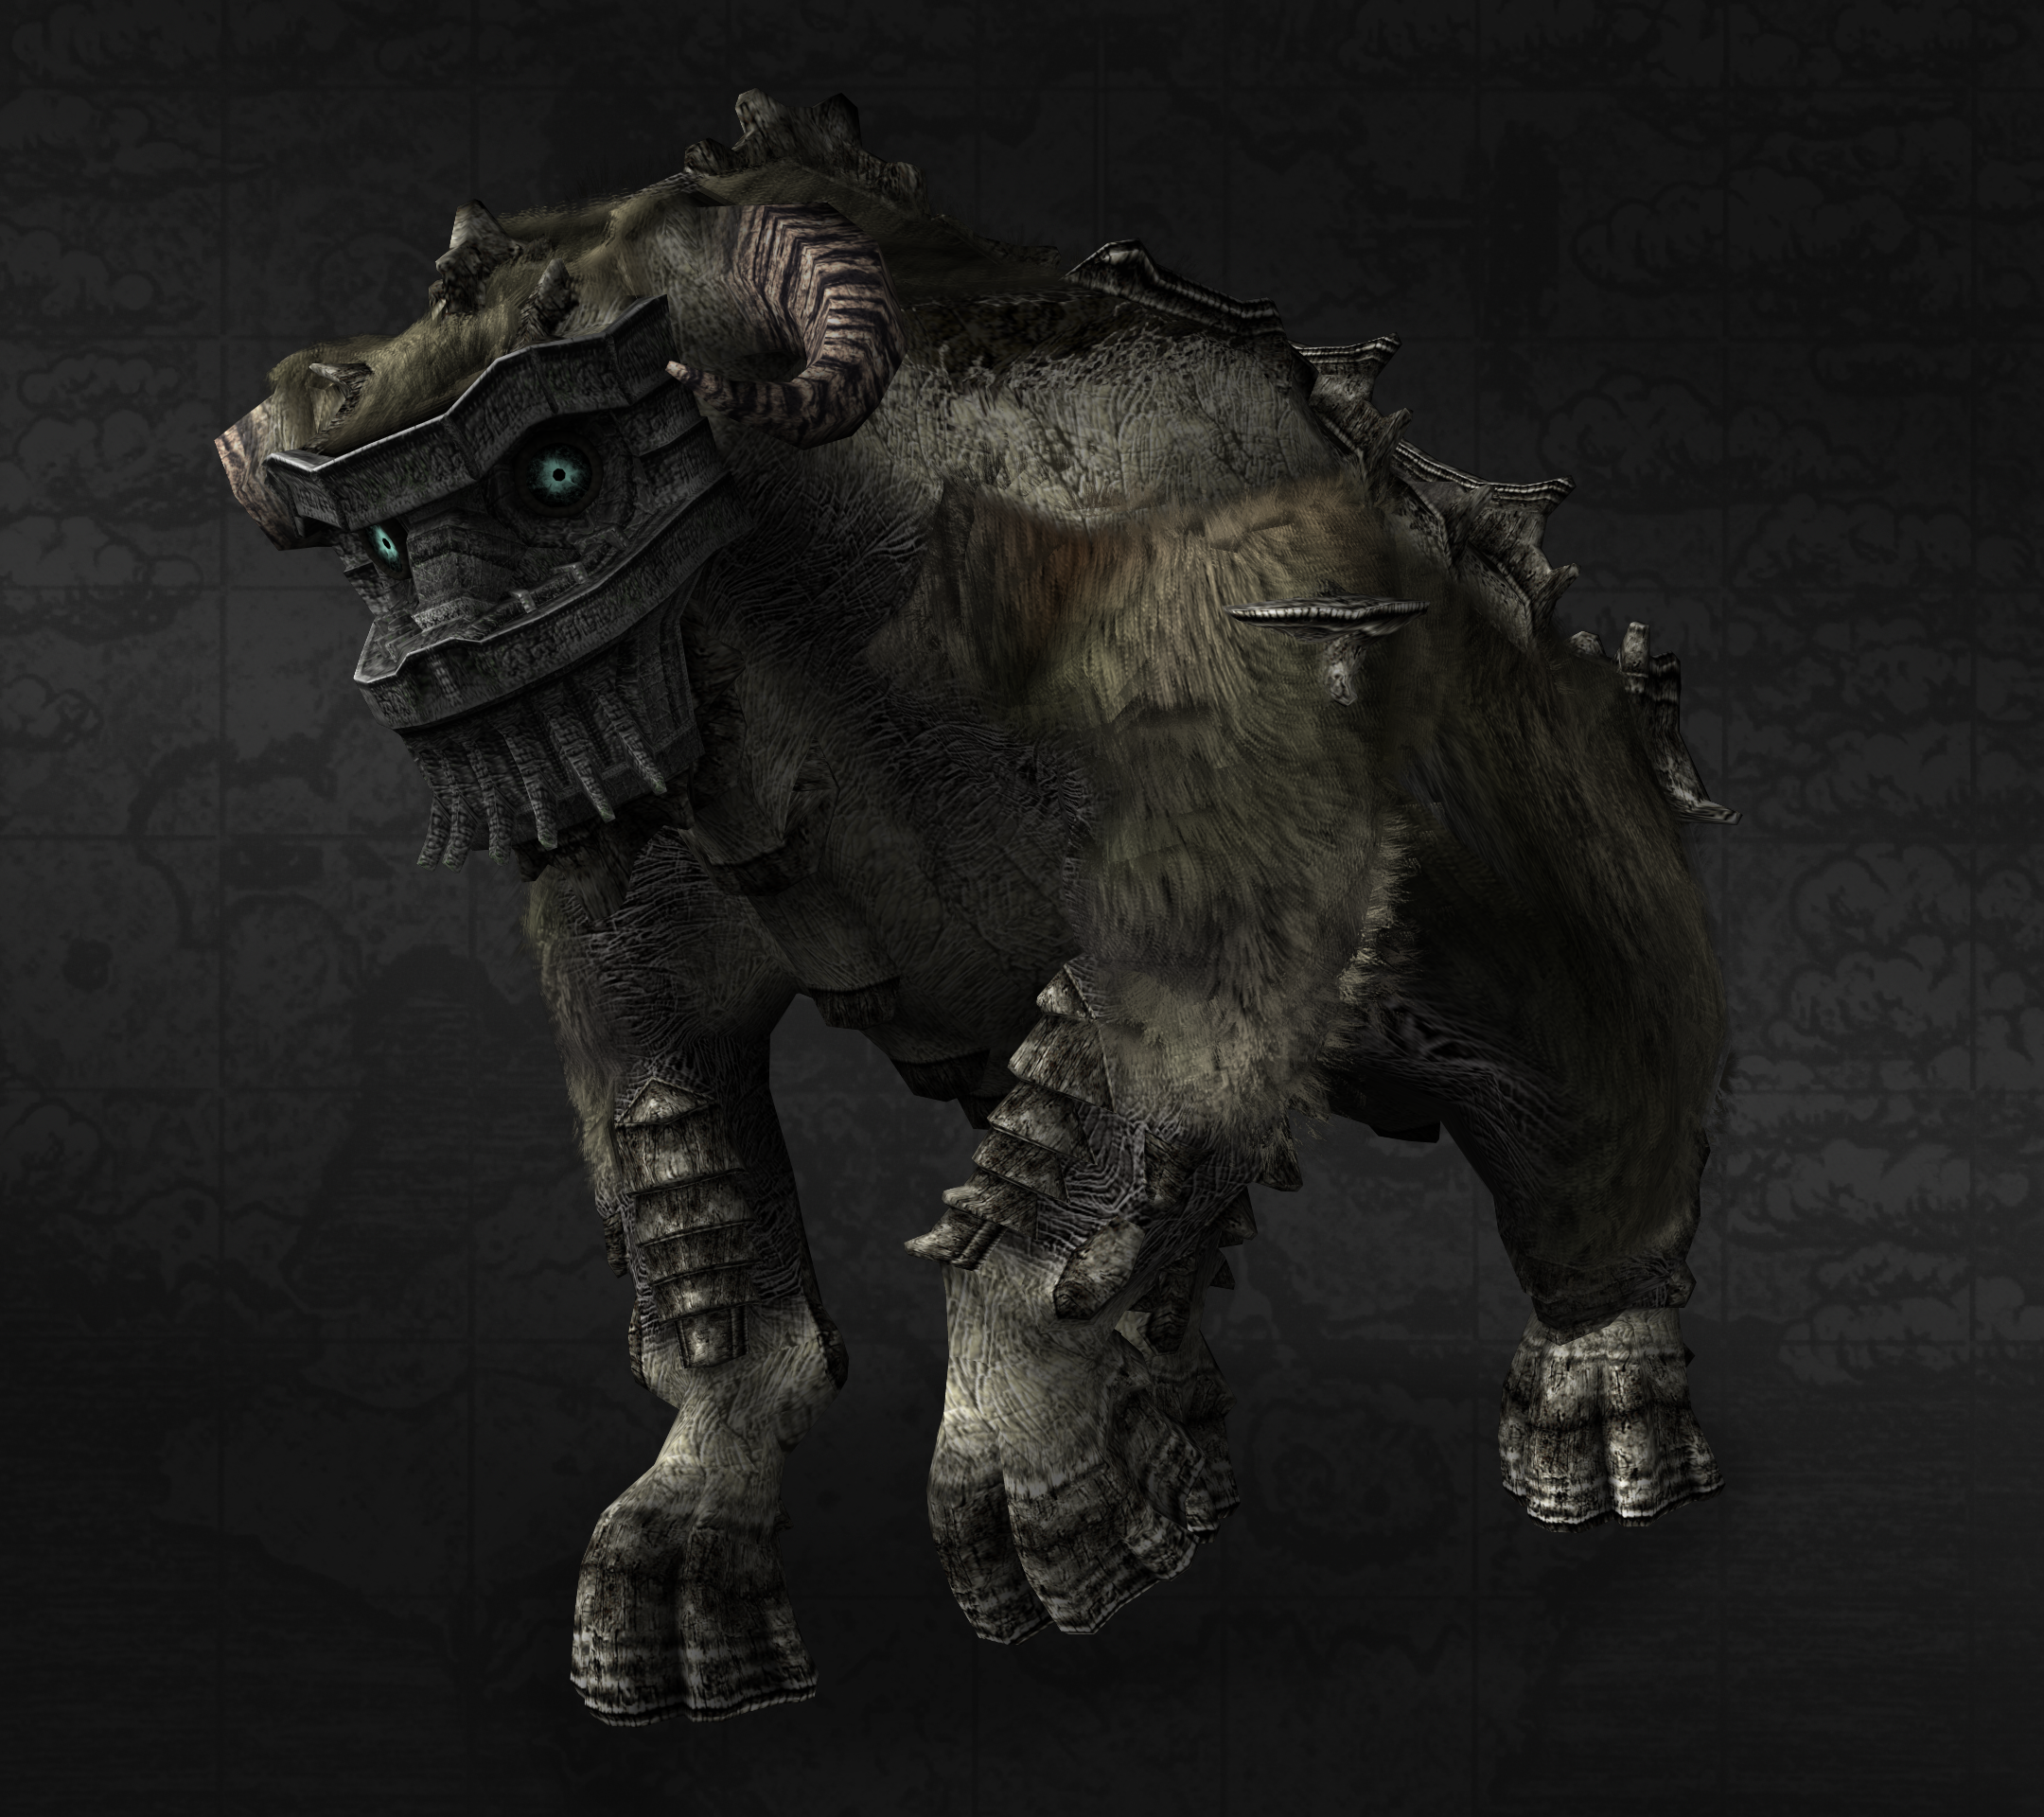 Shadow of the Colossus Appreciation Gallery [original PS2] :  r/ShadowoftheColossus